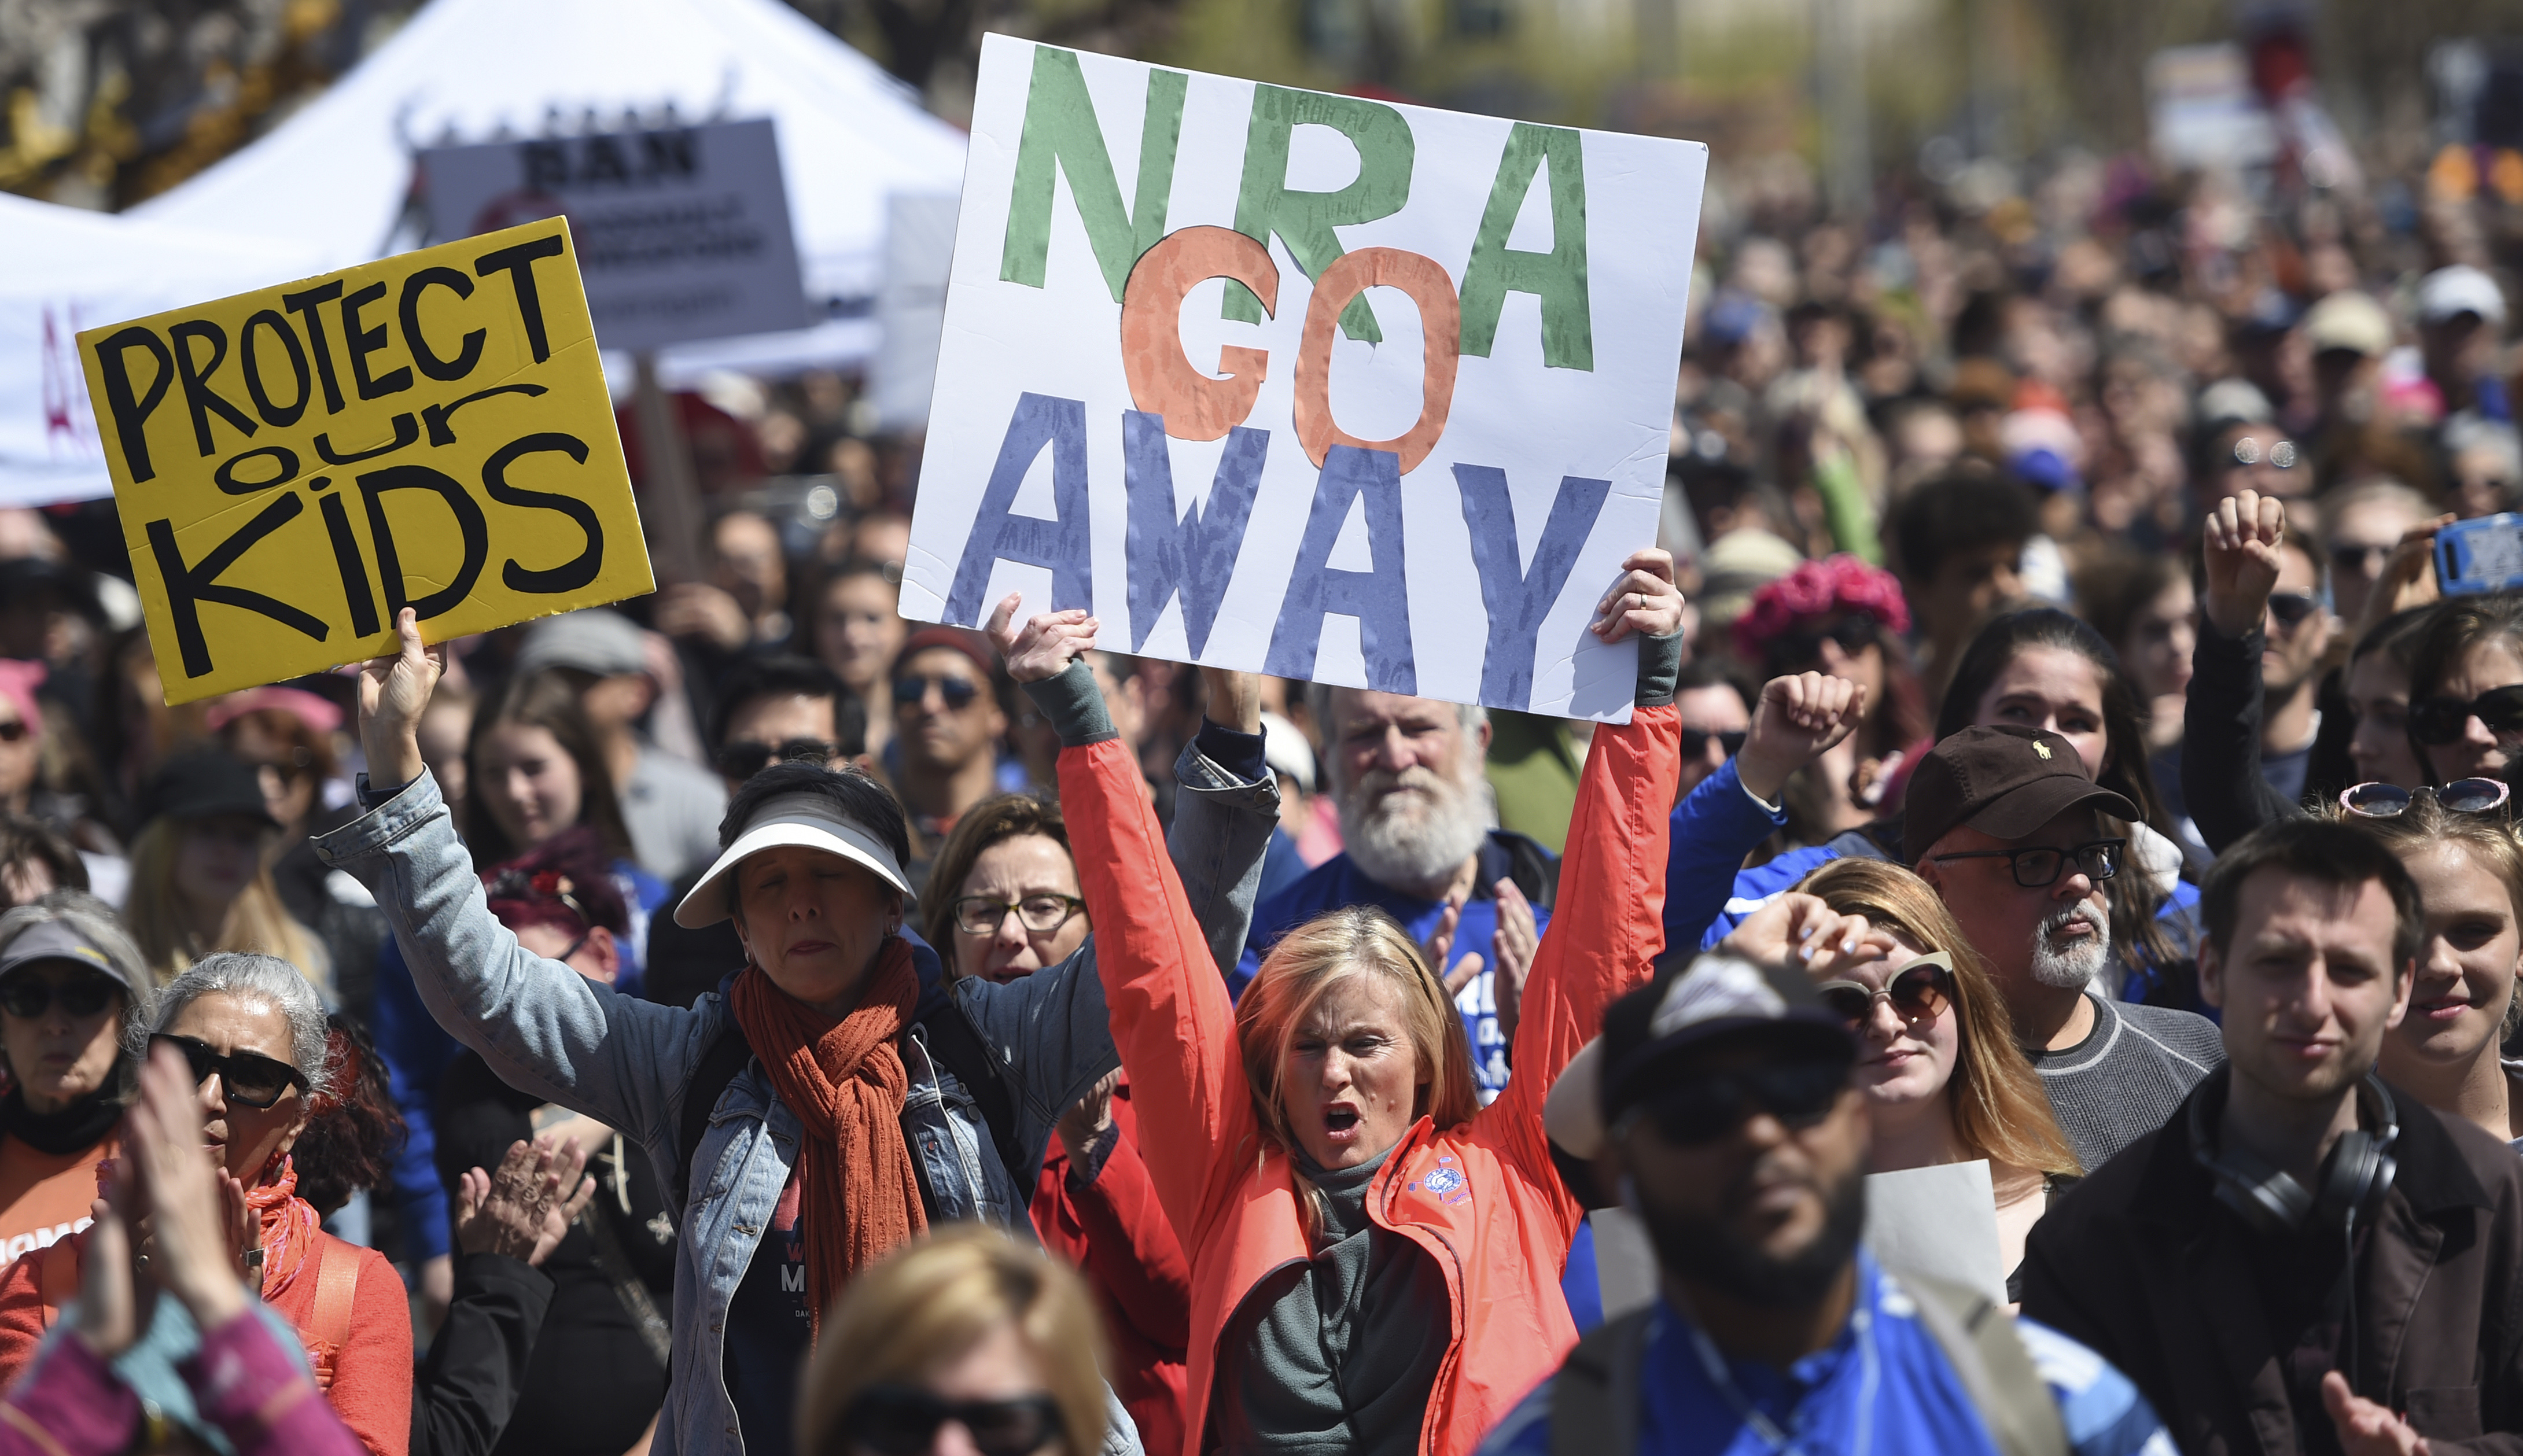 Crowds of people participate in the March for Our Lives rally in support of gun control, in San Francisco in March 2018. Kialo and Spaceship Media have both featured discussions about gun control on their platforms